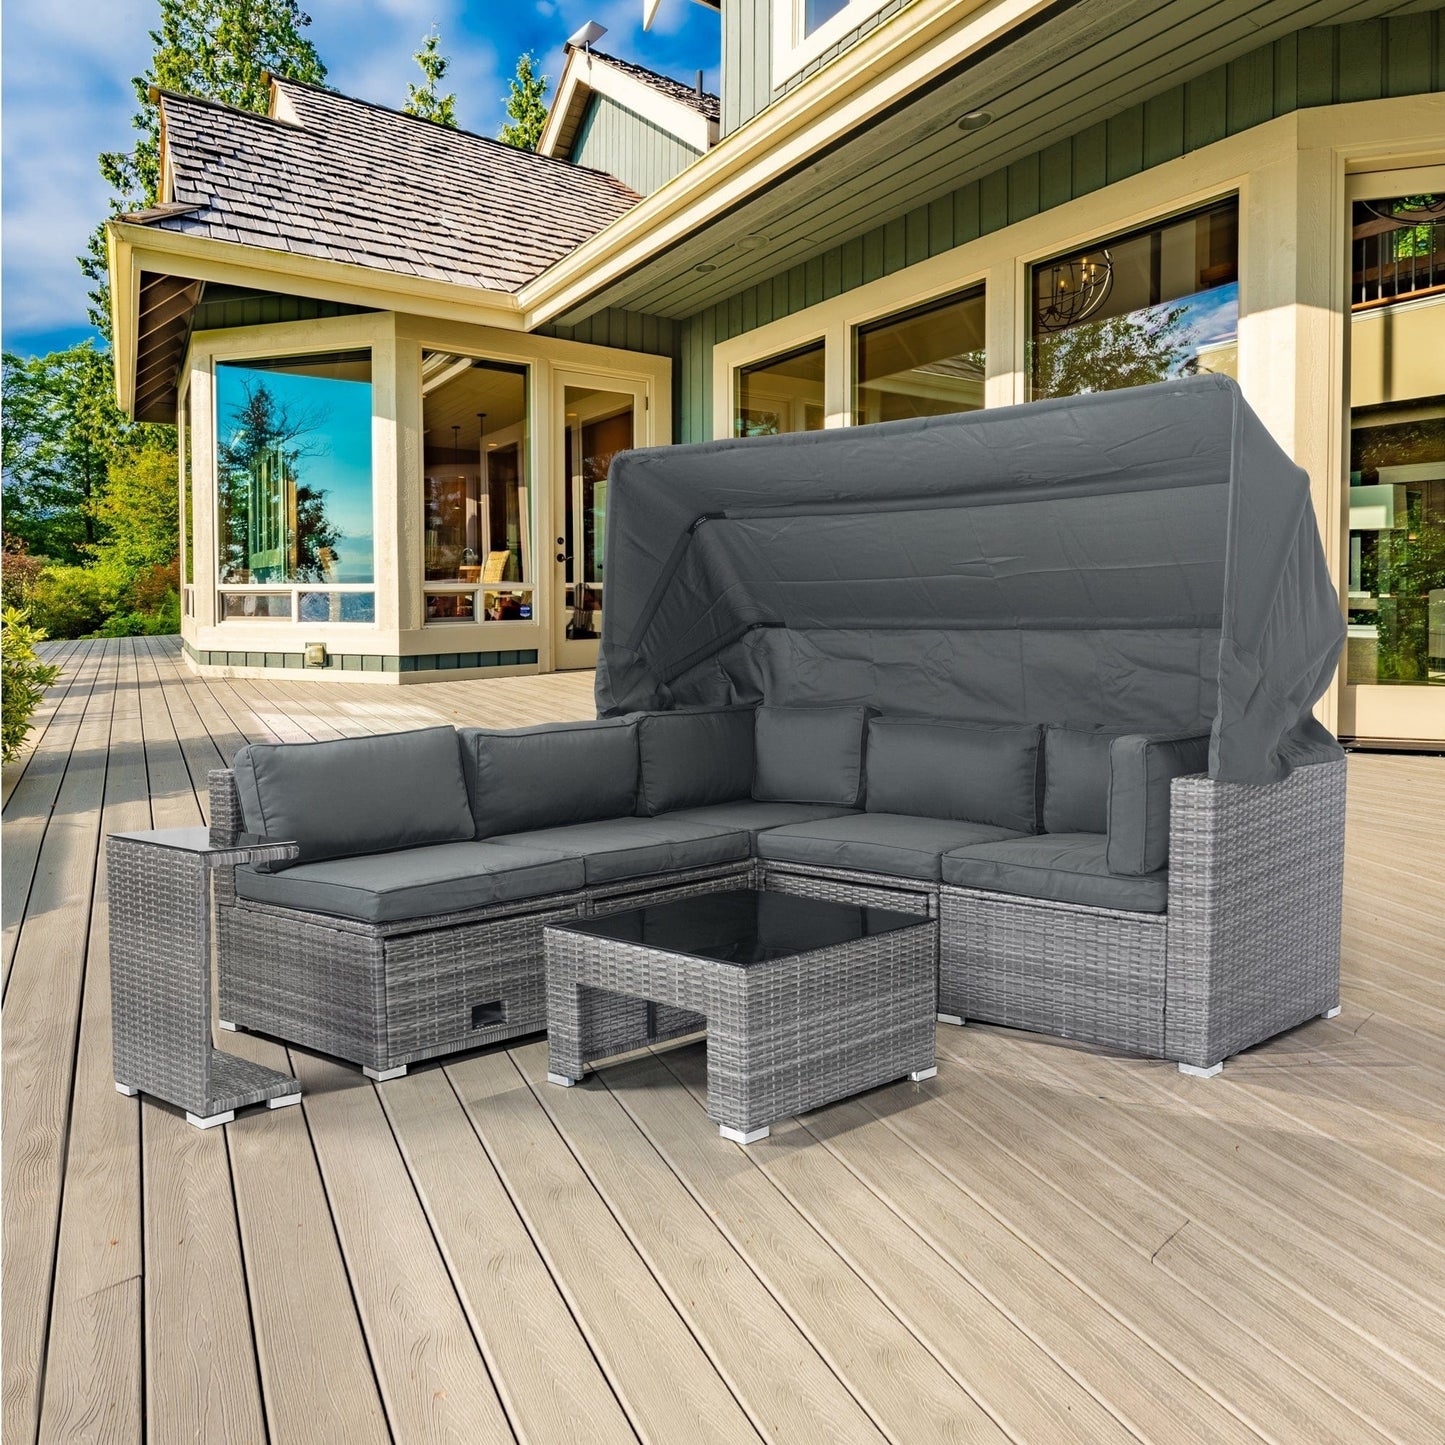 1st Choice Furniture Direct Patio Set 1st Choice 7-Piece Wicker Rattan Patio Furniture Set with Canopy